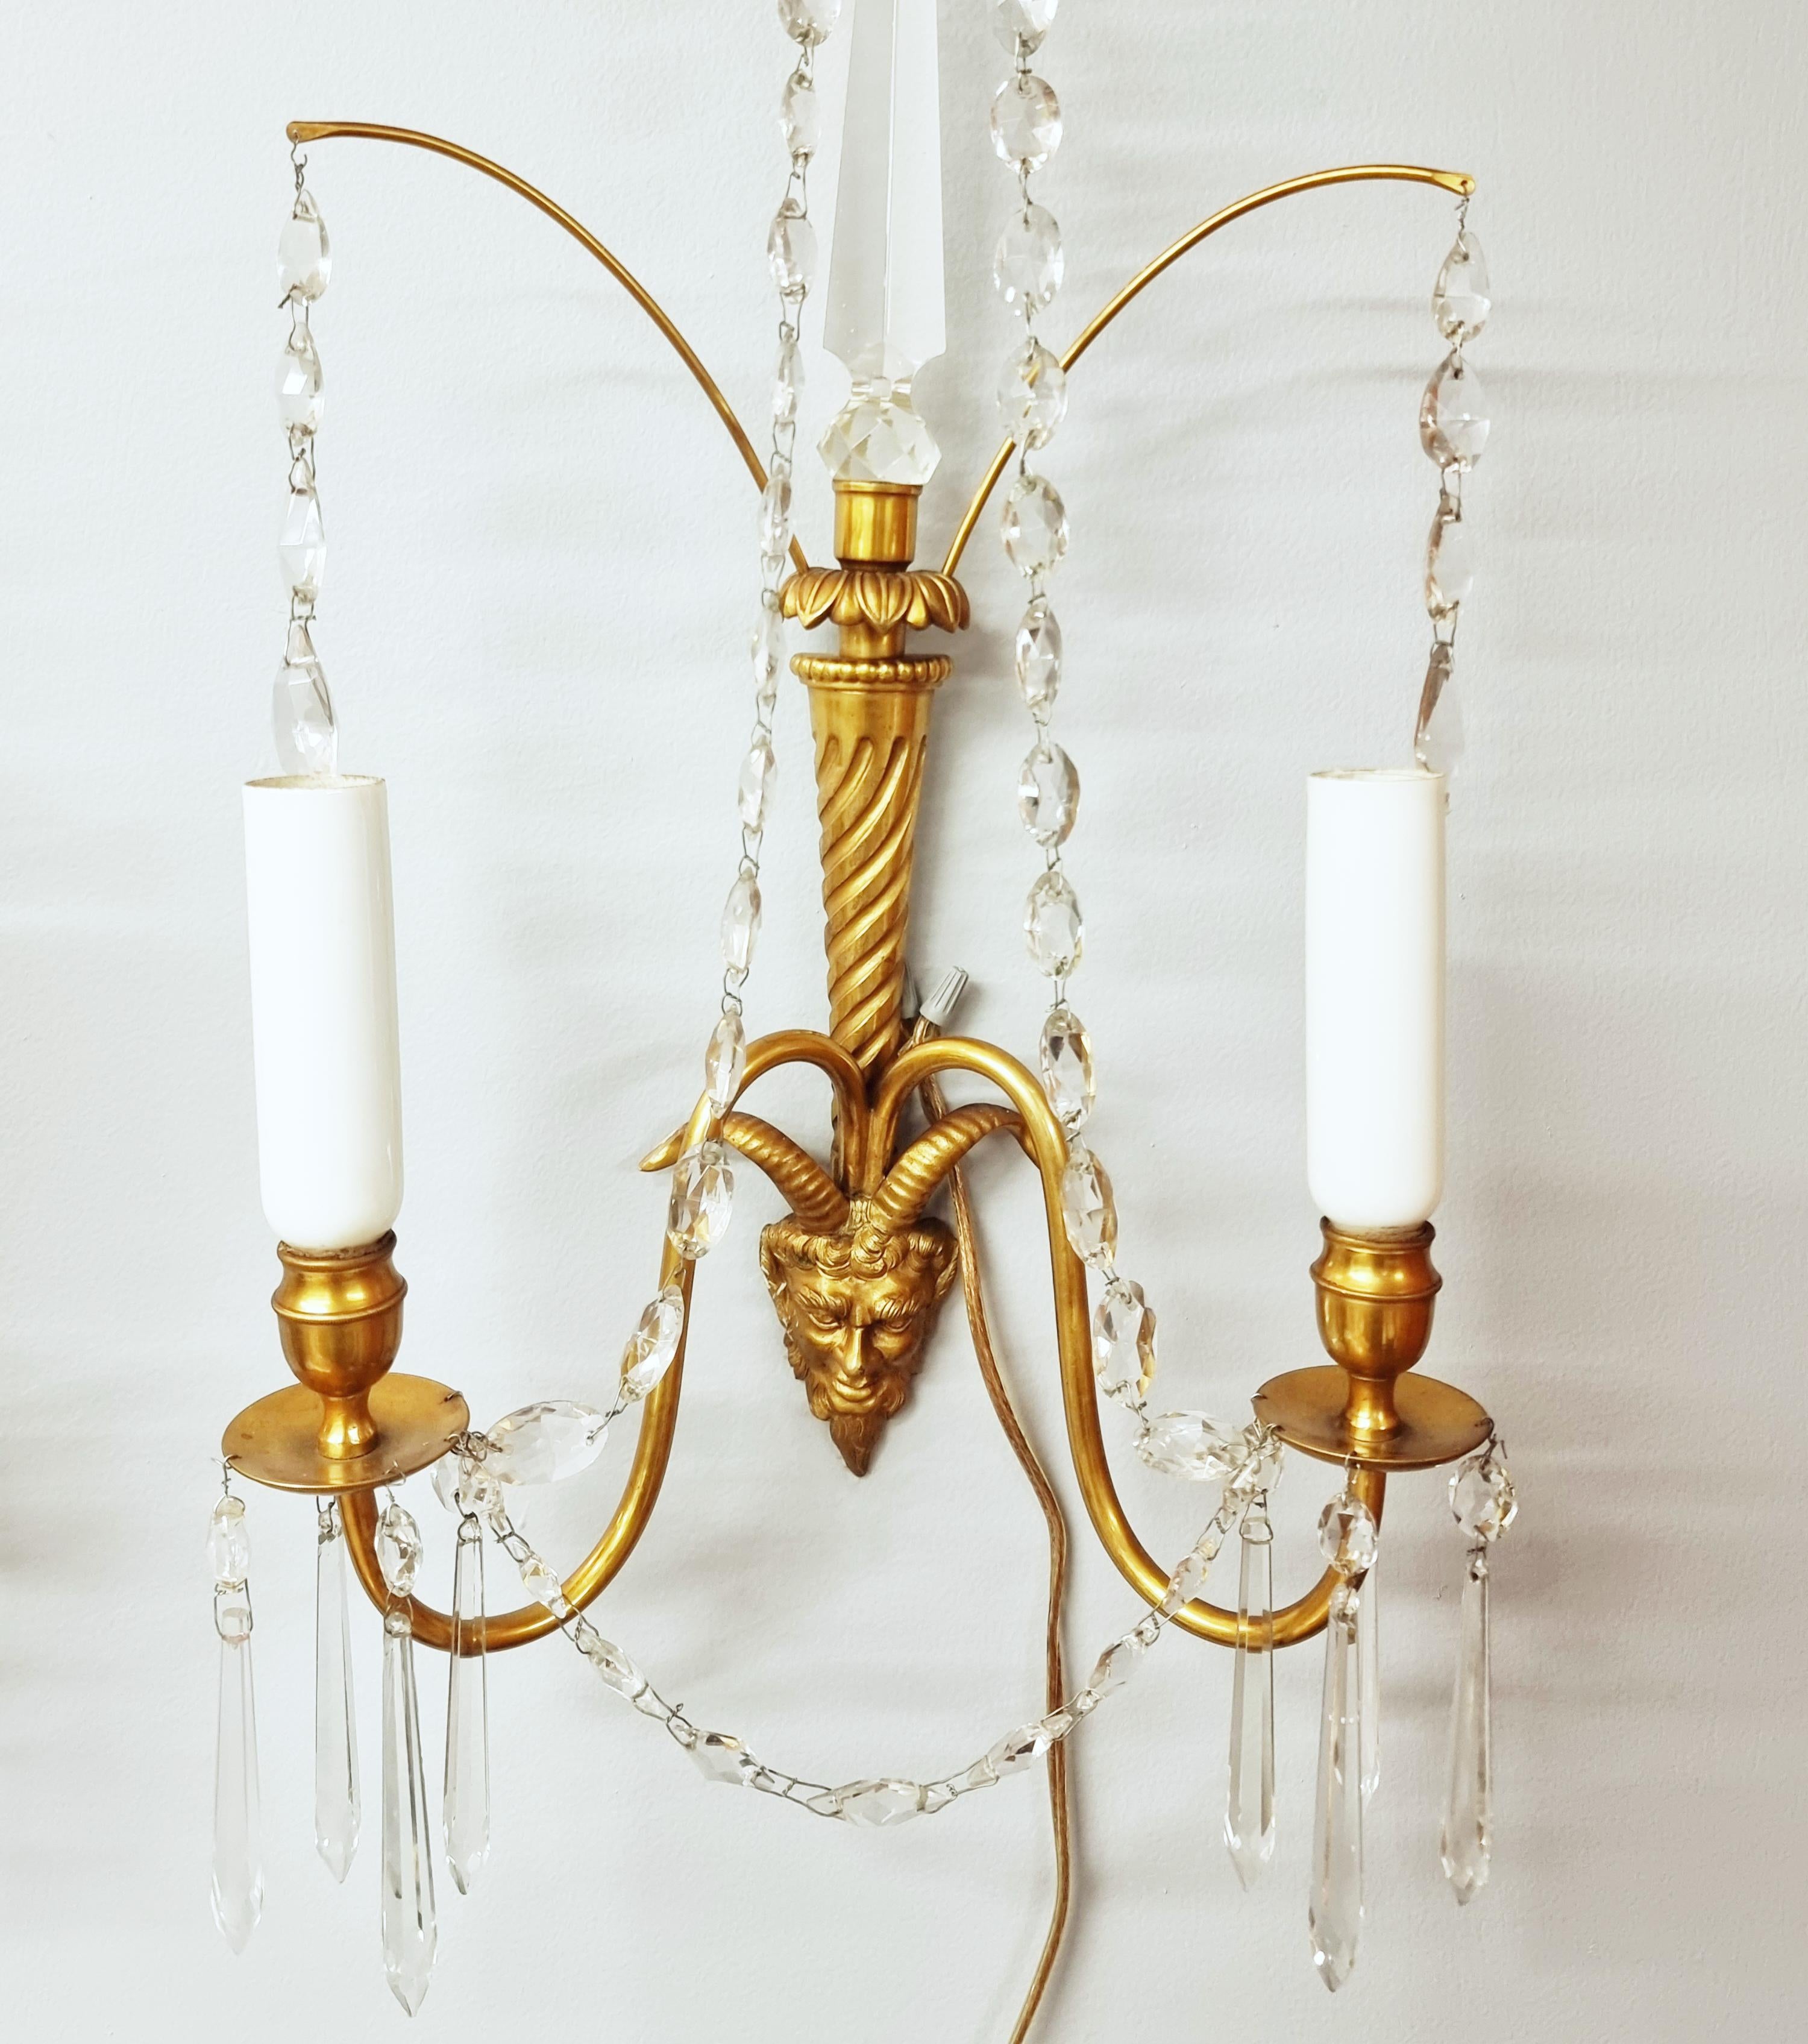 Pair of Baltic Gilt Satyr Faun Head Wall Sconces, Late 19th / Early 20th Century For Sale 4